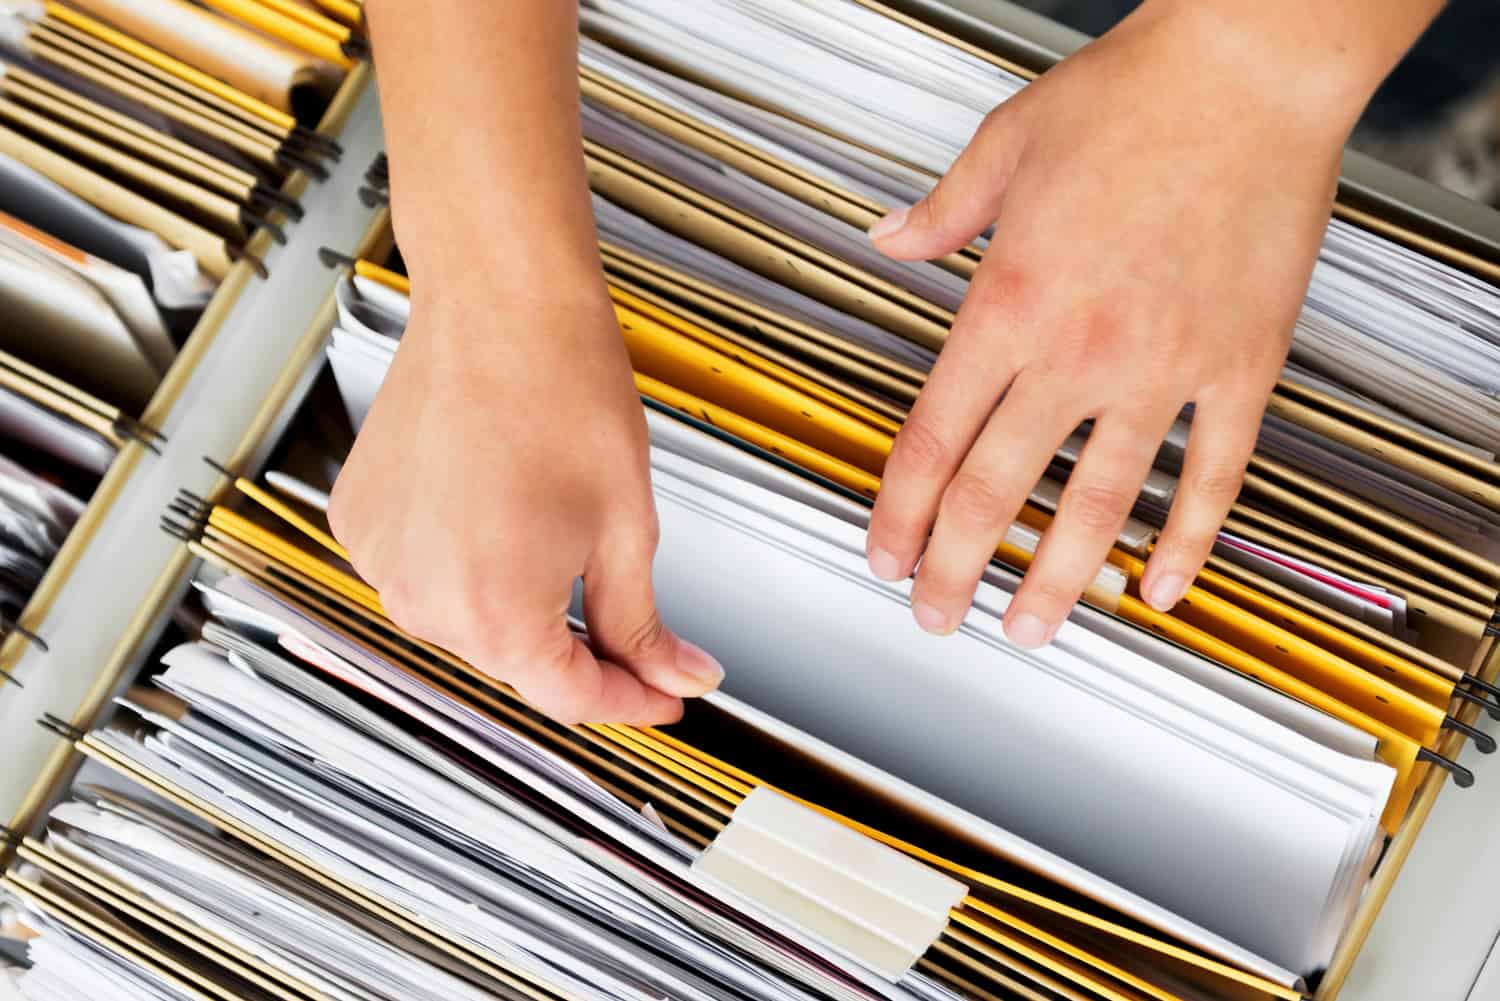 Close-up of hands searching in a file cabinet